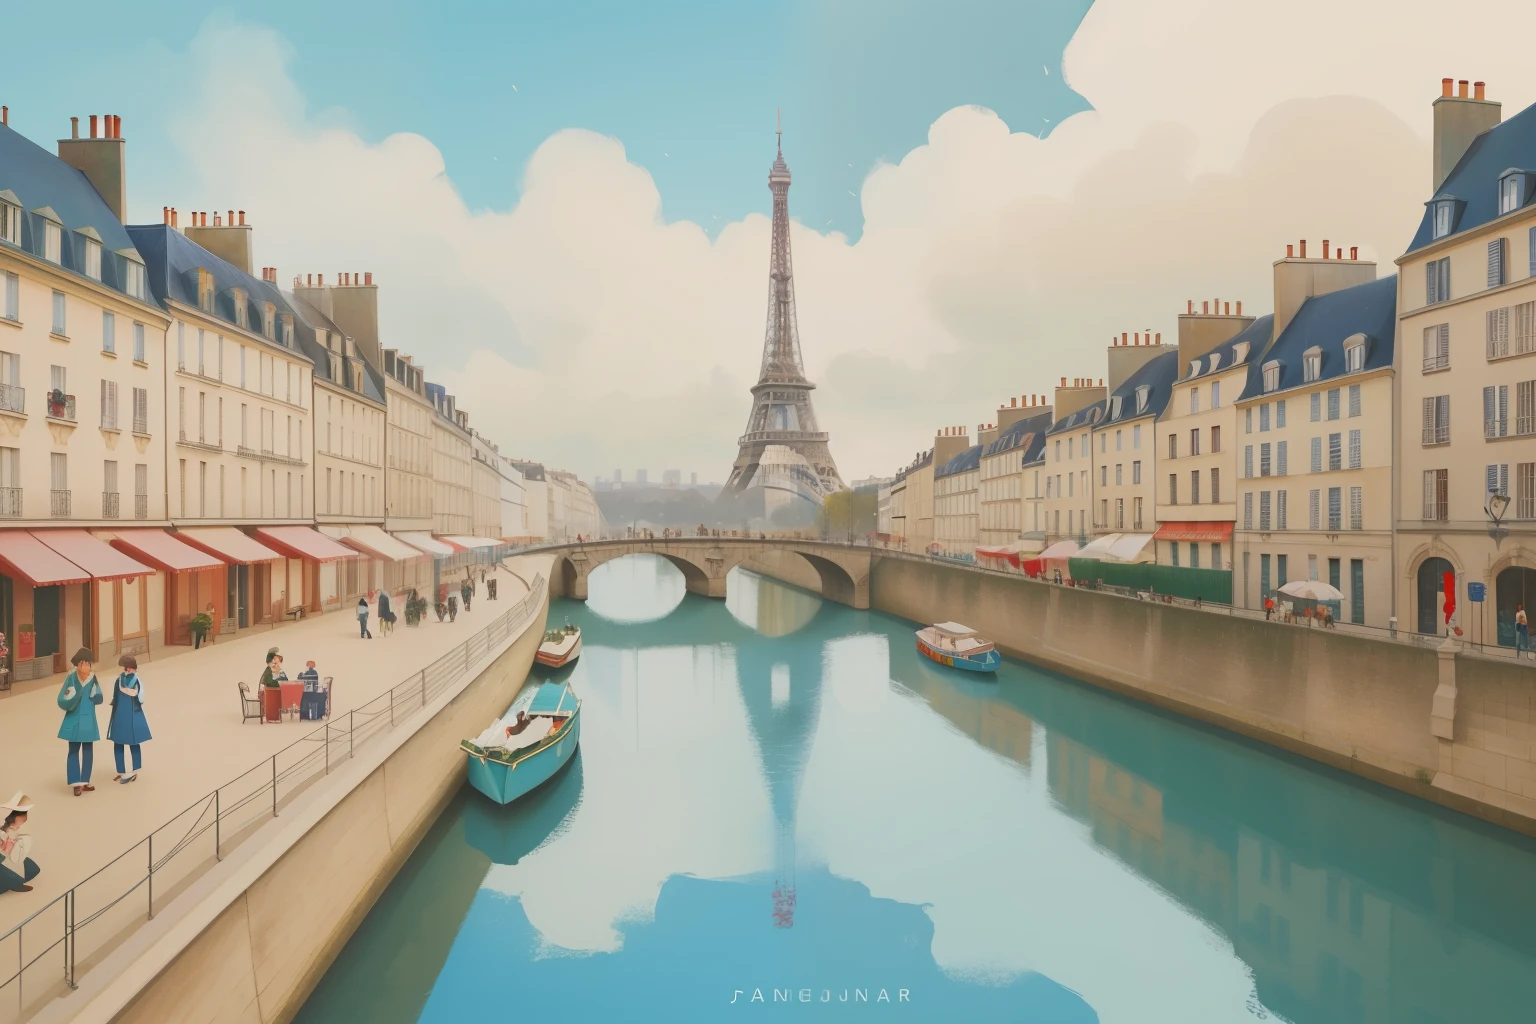 Year: January 2023. Activity: Umbrella Painting Workshop in Paris, France.

Description: Characters, dressed in whimsical raincoats, gather under a colorful array of umbrellas to paint vibrant scenes. The Seine River and iconic Parisian architecture provide a picturesque background.